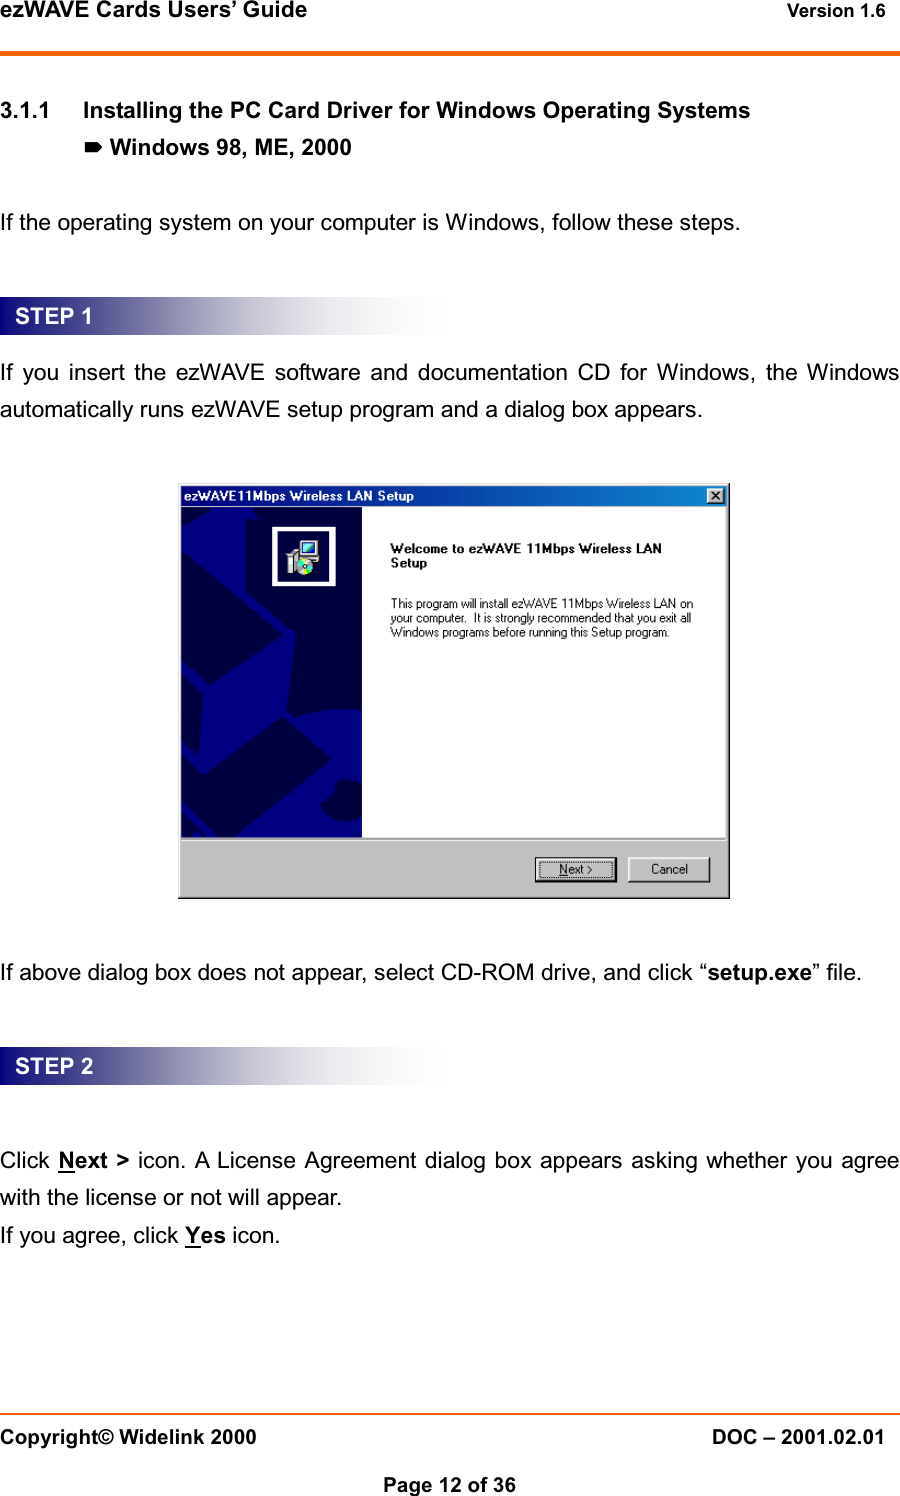 ezWAVE Cards Users’ Guide Version 1.6 Copyright© Widelink 2000 DOC – 2001.02.01Page 12 of 36 3.1.1 Installing the PC Card Driver for Windows Operating SystemsWindows 98, ME, 2000If the operating system on your computer is Windows, follow these steps.If you insert the ezWAVE software and documentation CD for Windows, the Windowsautomatically runs ezWAVE setup program and a dialog box appears.If above dialog box does not appear, select CD-ROM drive, and click “setup.exe”file.Click Next &gt; icon. A License Agreement dialog box appears asking whether you agreewith the license or not will appear.If you agree, click Yes icon.STEP 1STEP 2